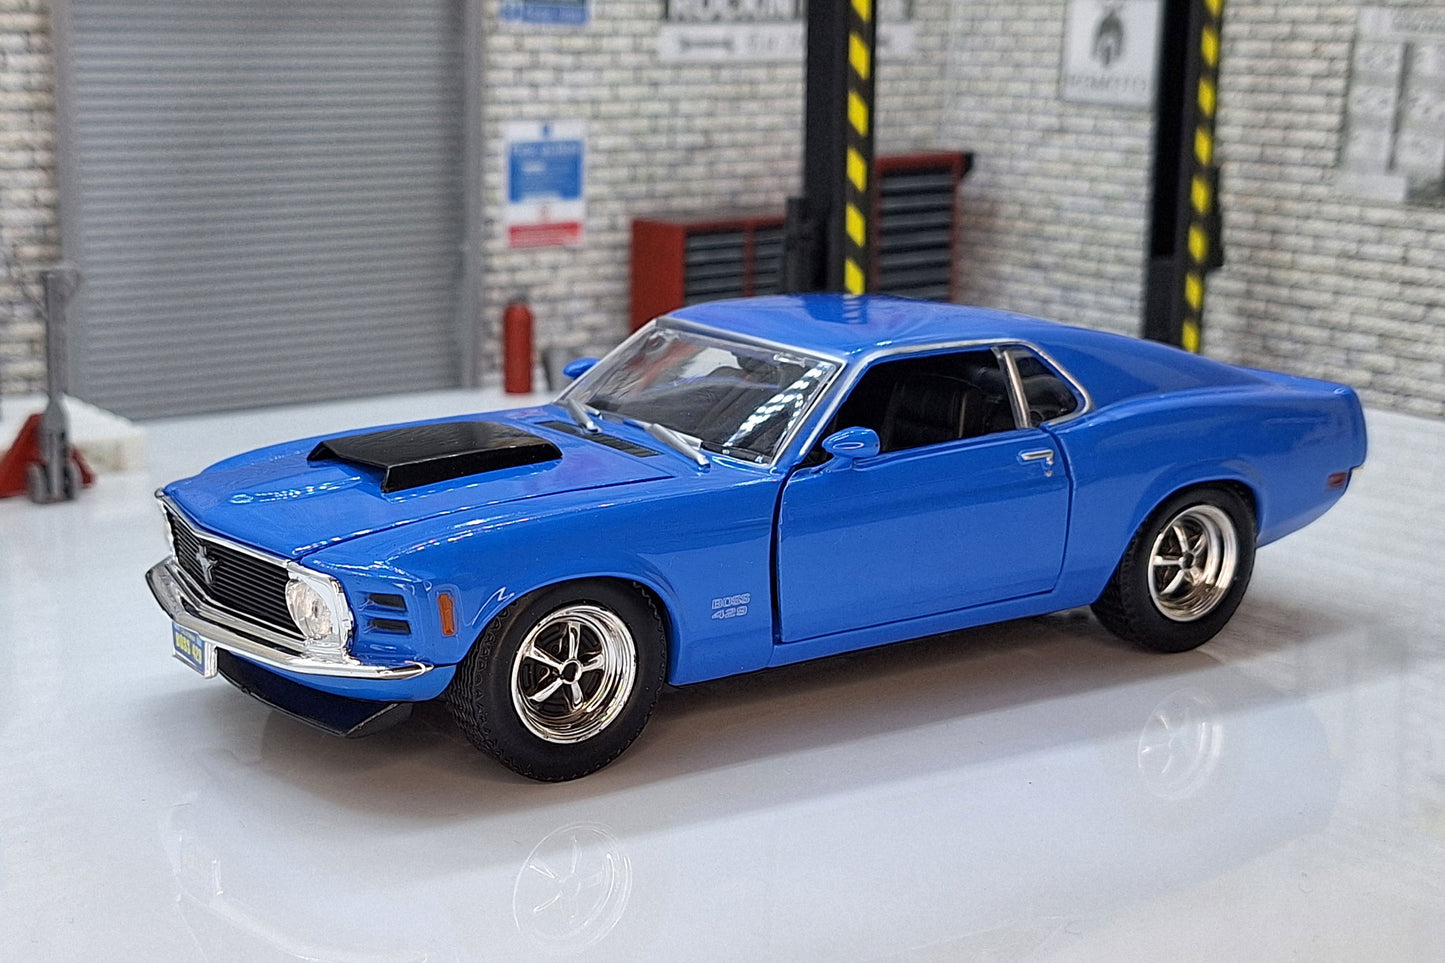 Ford Mustang Boss 429, Blue, 1970 1:24 Scale Car